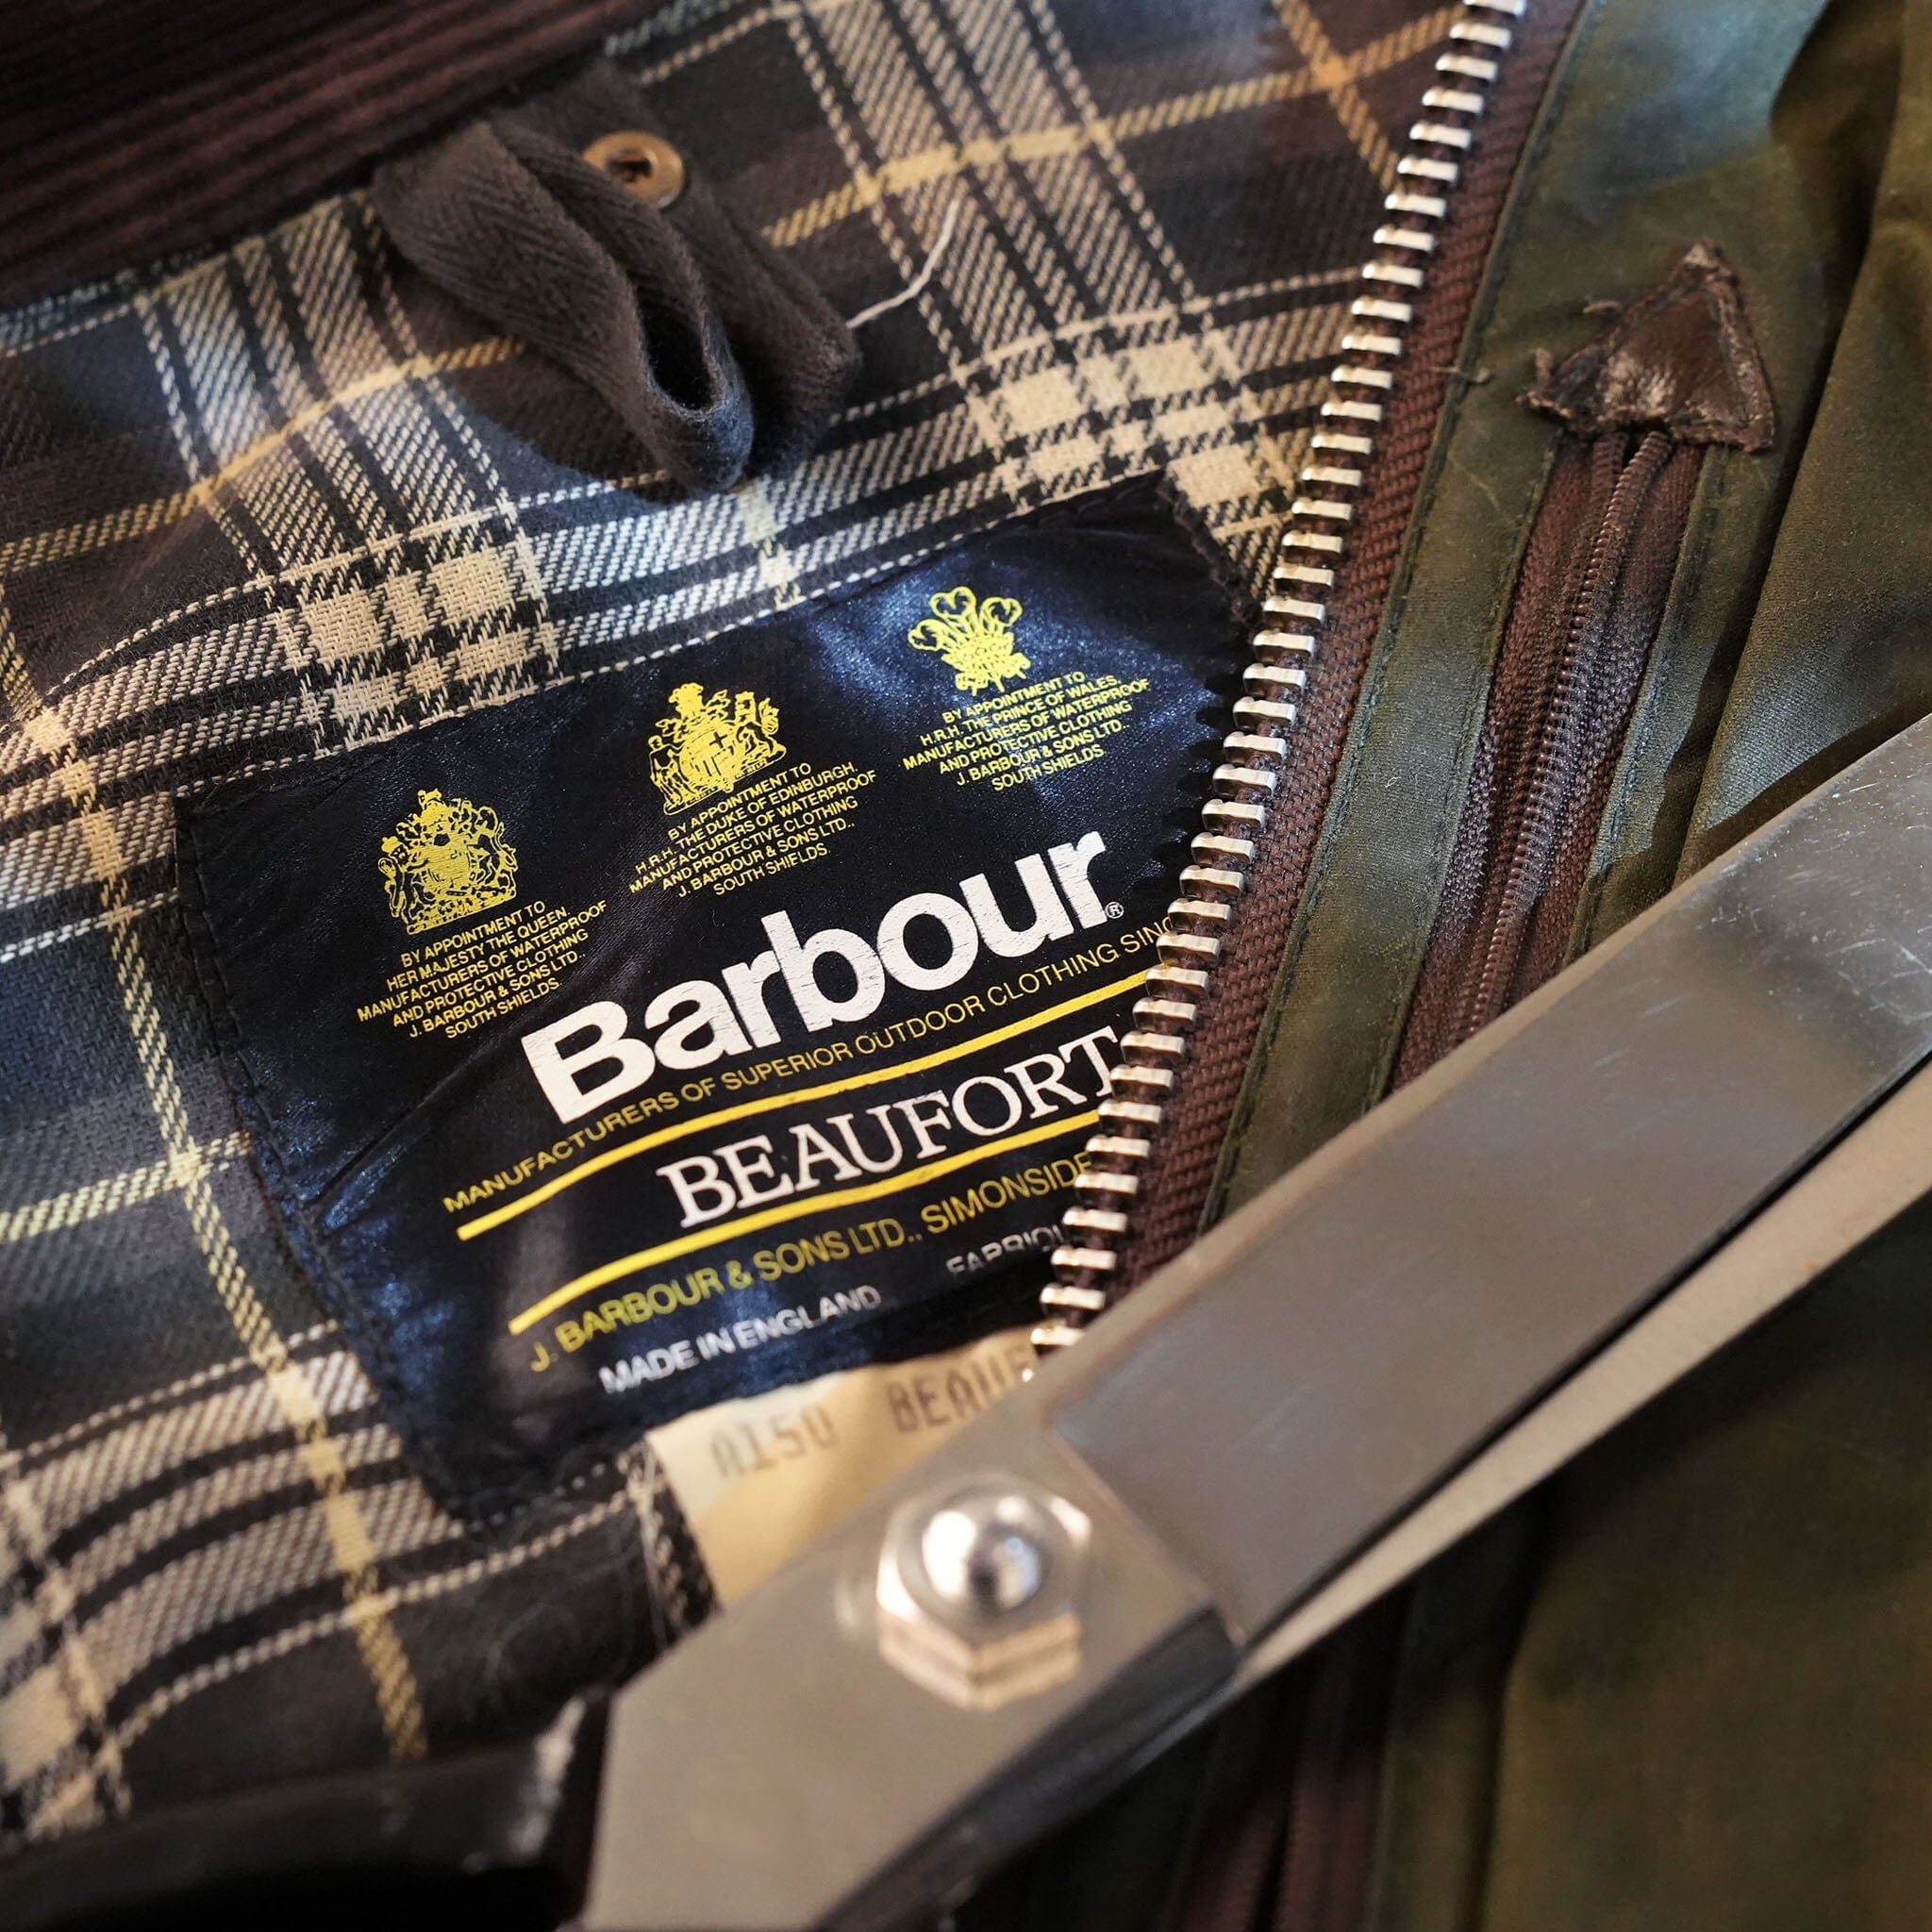 The Highlands Watch Strap - Made of Vintage Barbour Fabric - Jubilee Edition